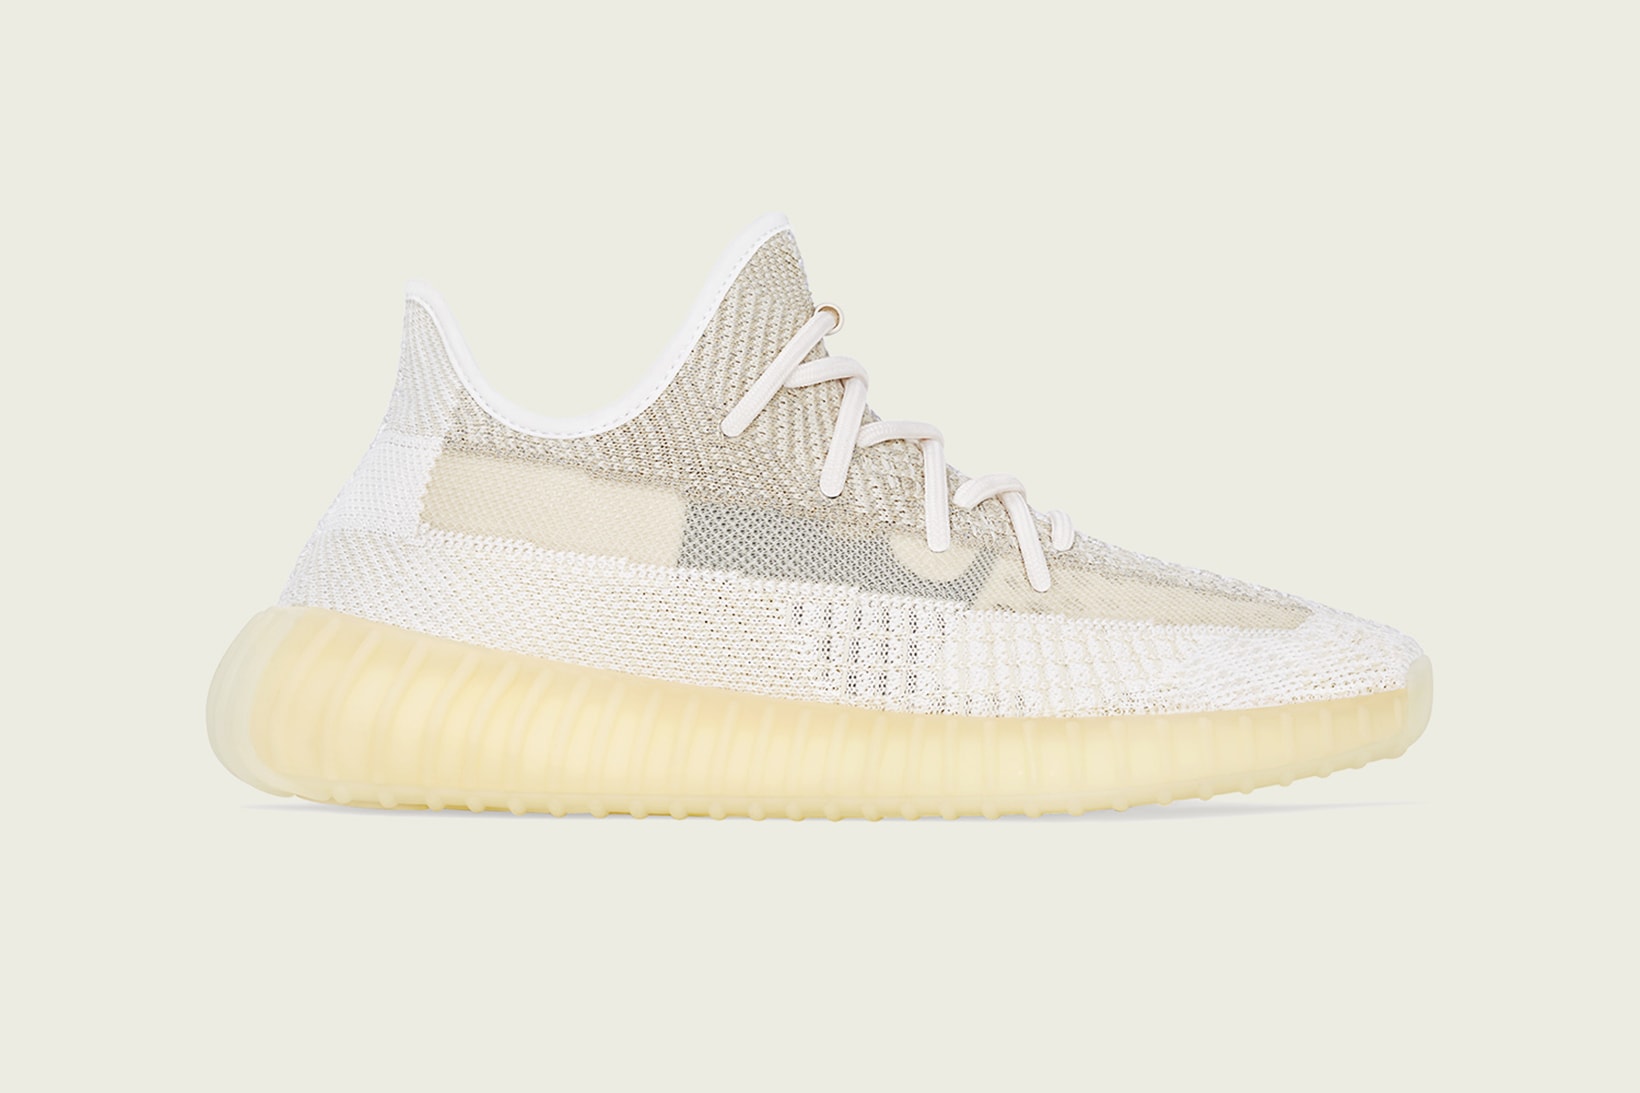 adidas kanye west yeezy boost 350 v2 natural colorway sneakerhead shoes footwear cream white